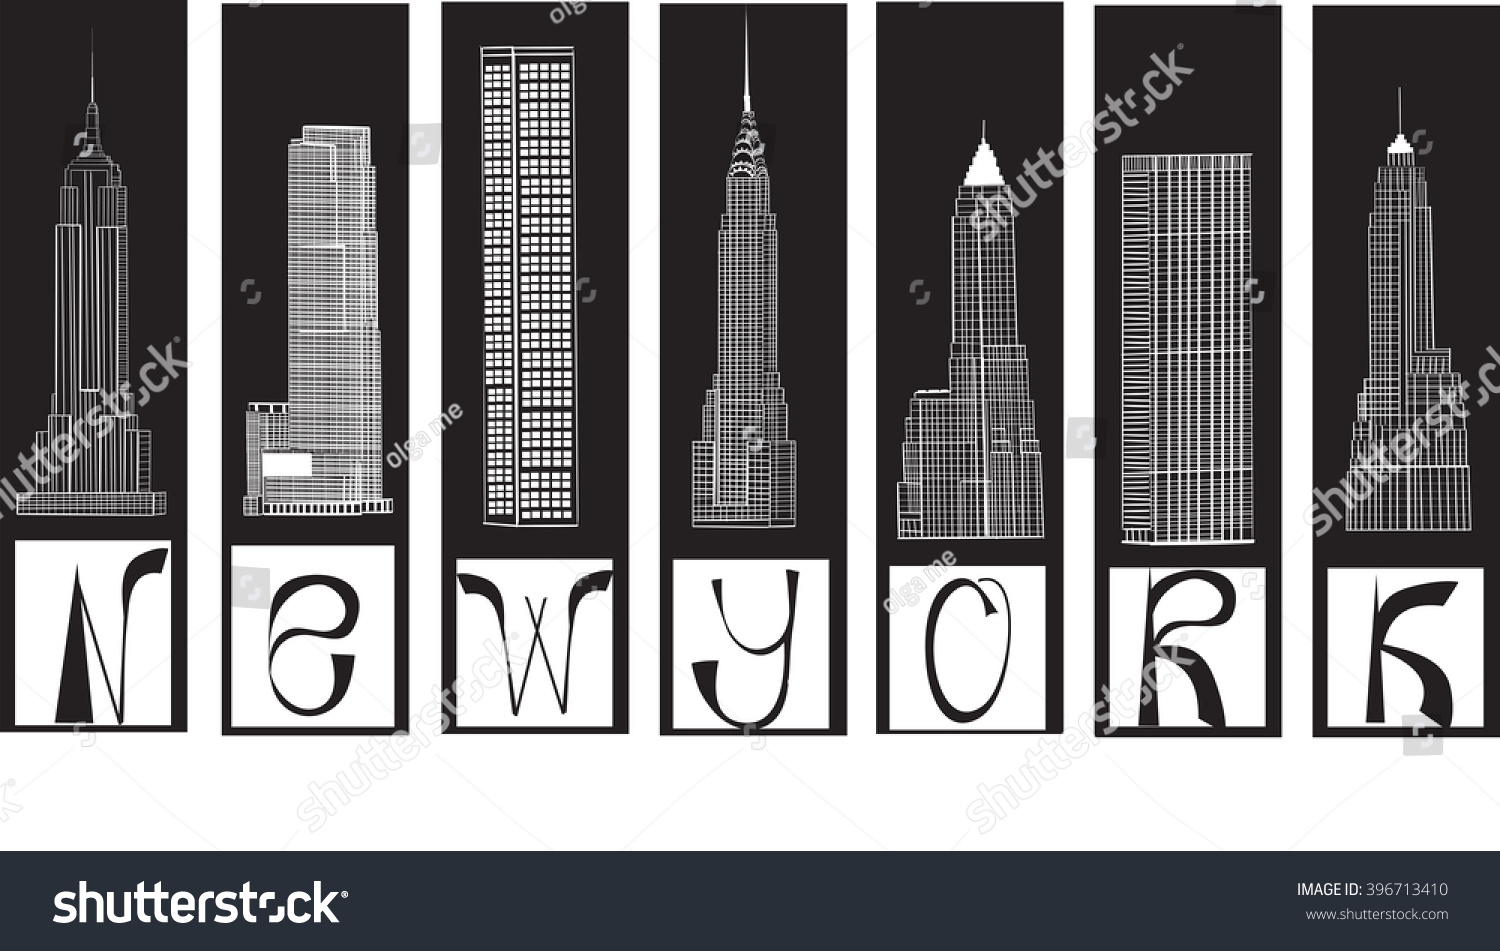 SVG of famous buildings in New York City . EPS10 svg